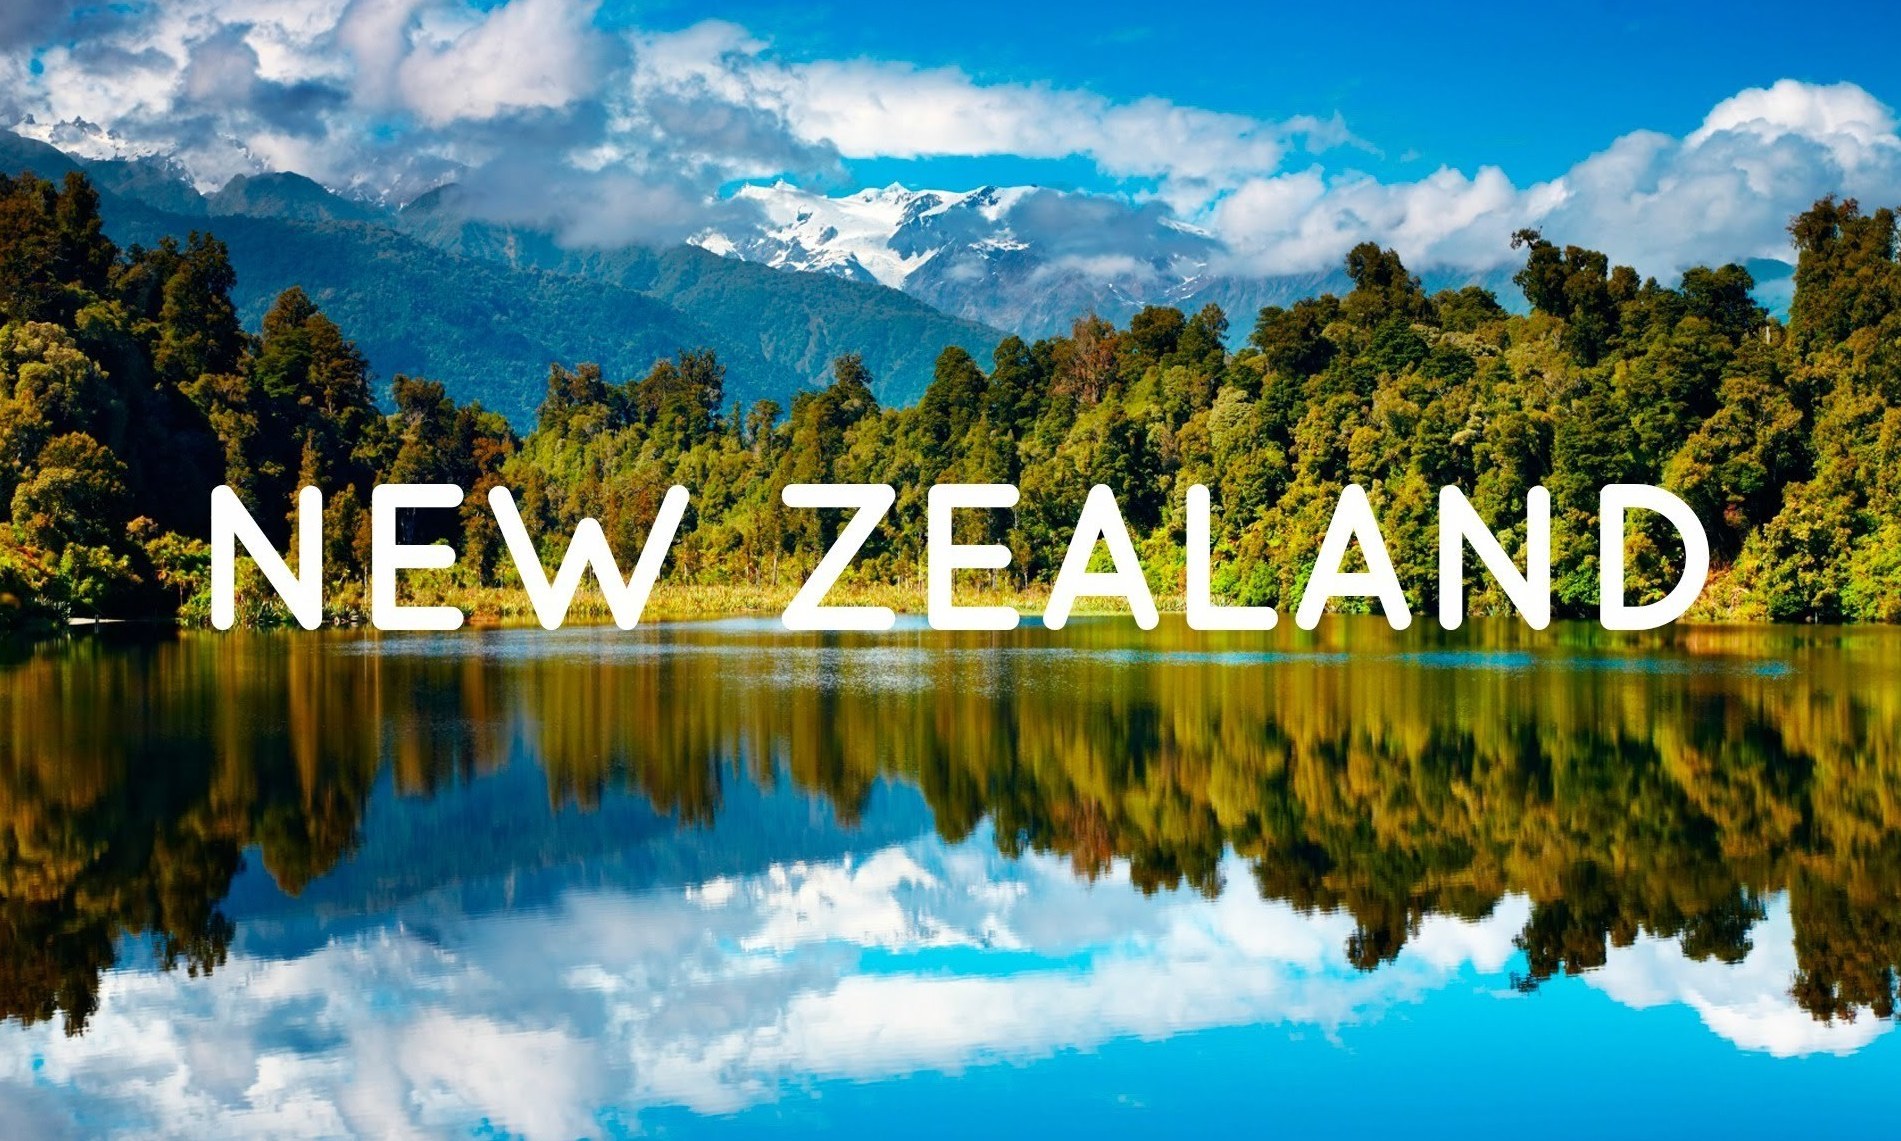 Meeting New Zealand as volunteer and tourist